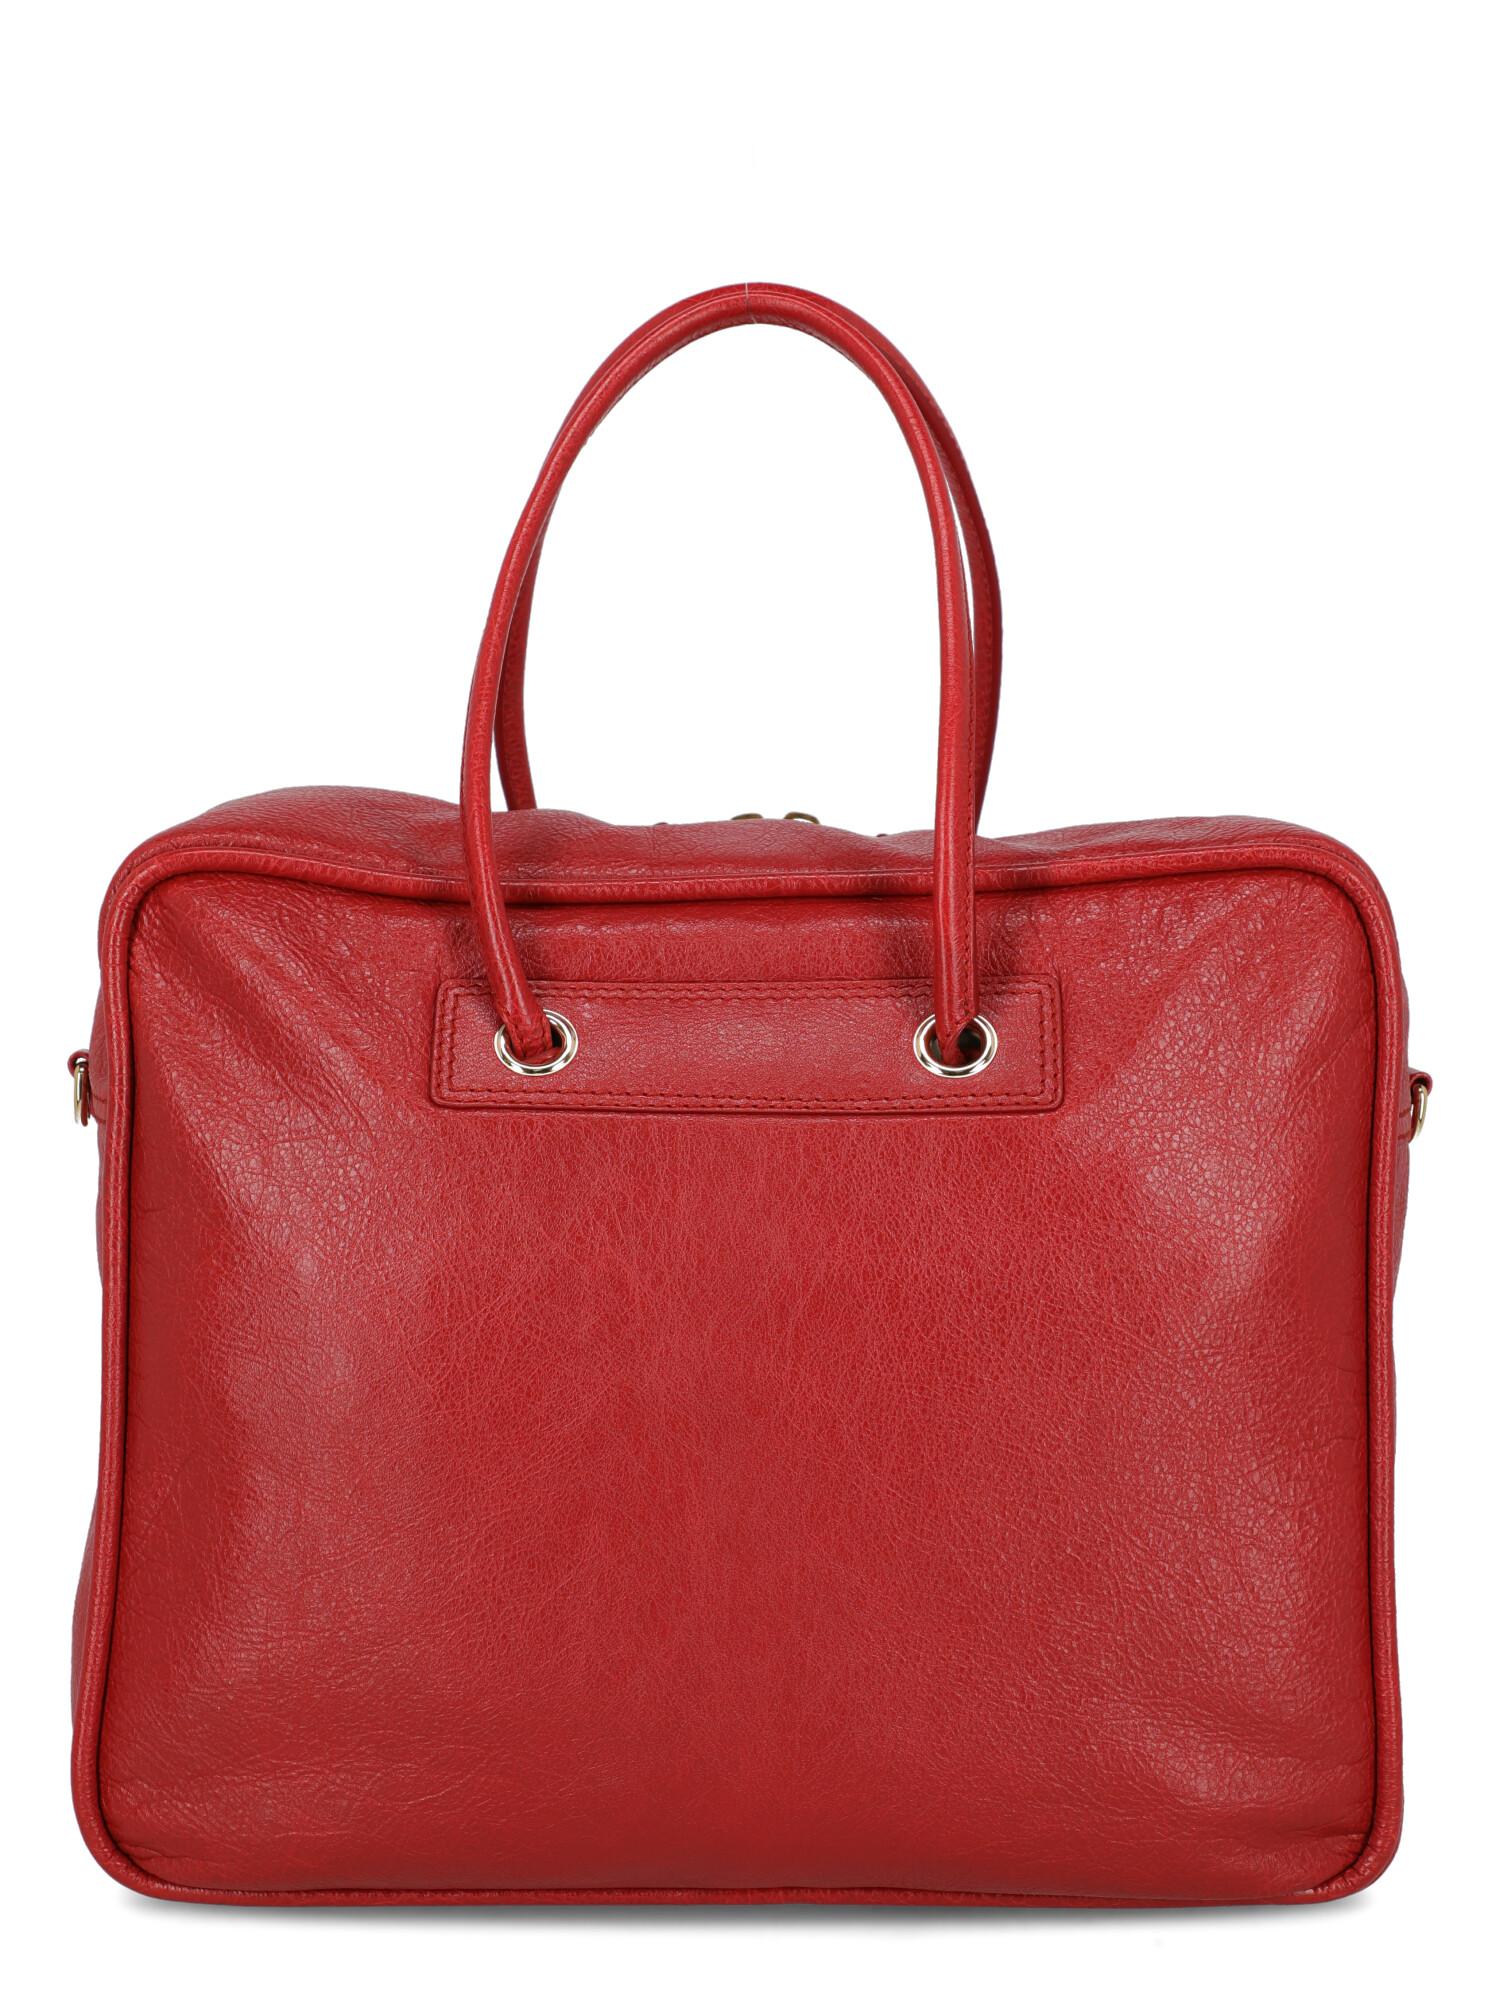 Women's Balenciaga Woman Shoulder bag Red Leather For Sale